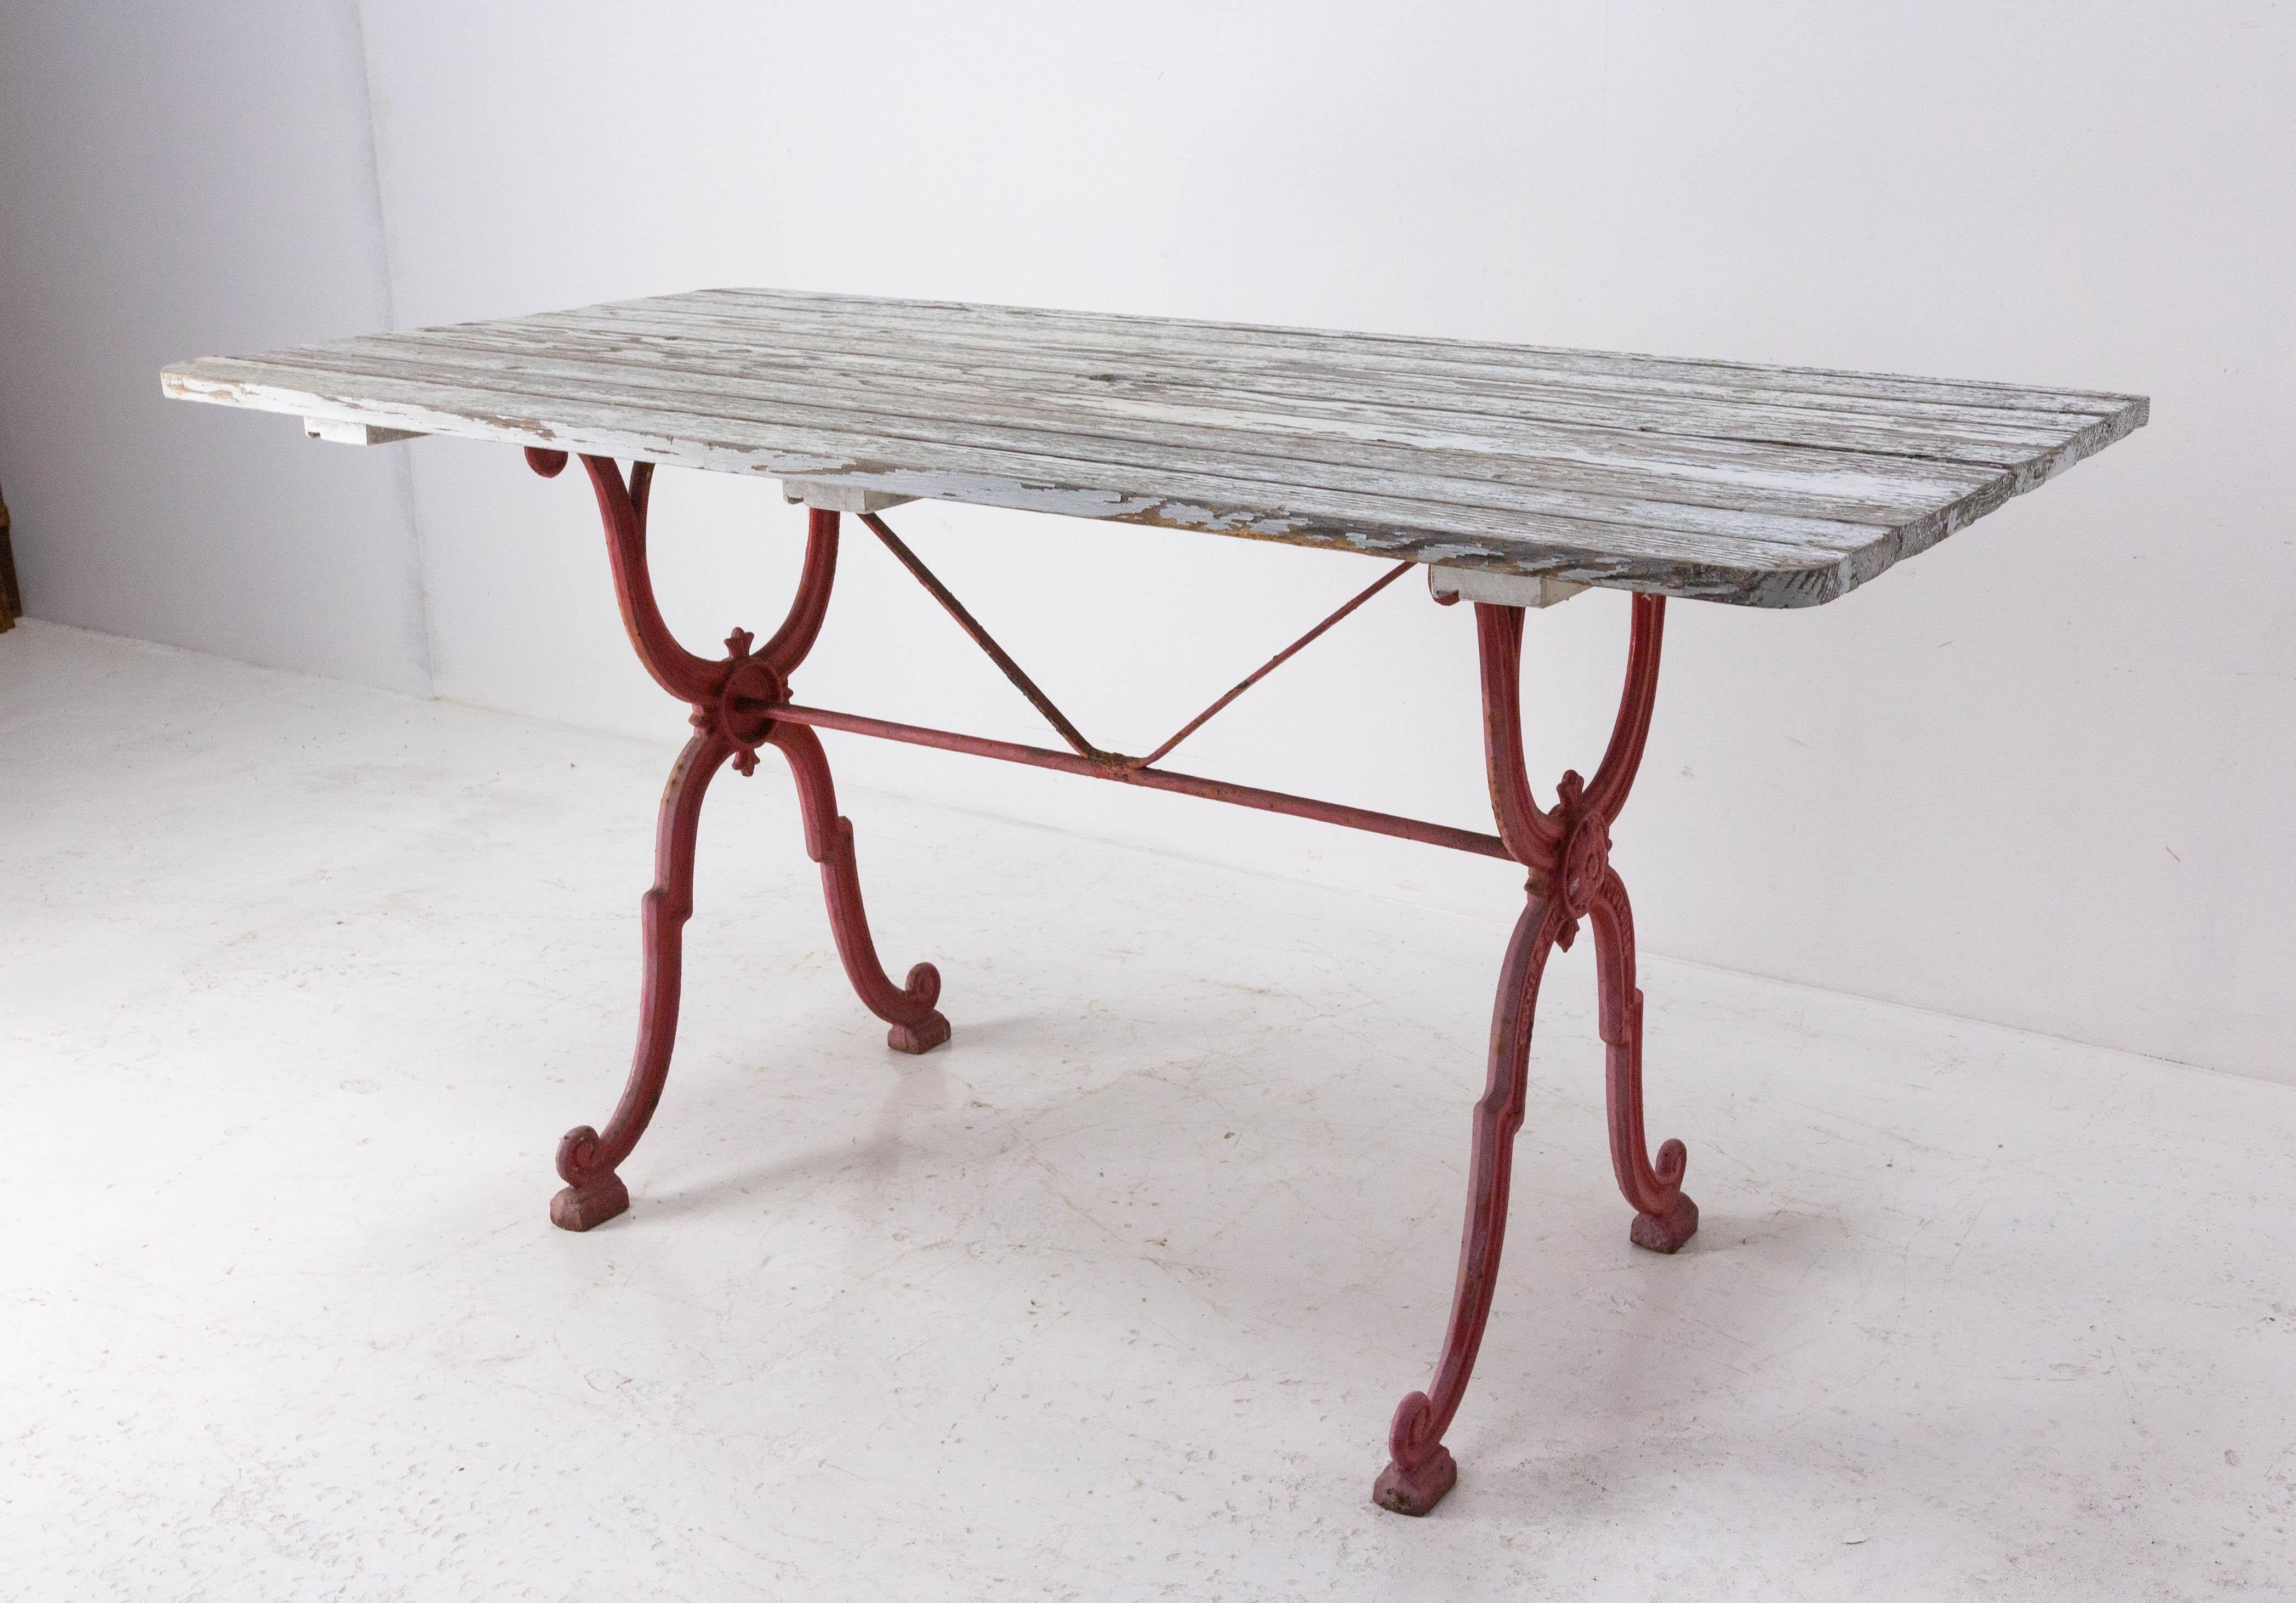 Bistro table with wood top and cast iron legs,
French, circa 1900
The top is not the original but has a nice patina
Good antique condition with general signs of use

Shipping:
L140 P68,5 H71 32 kg.